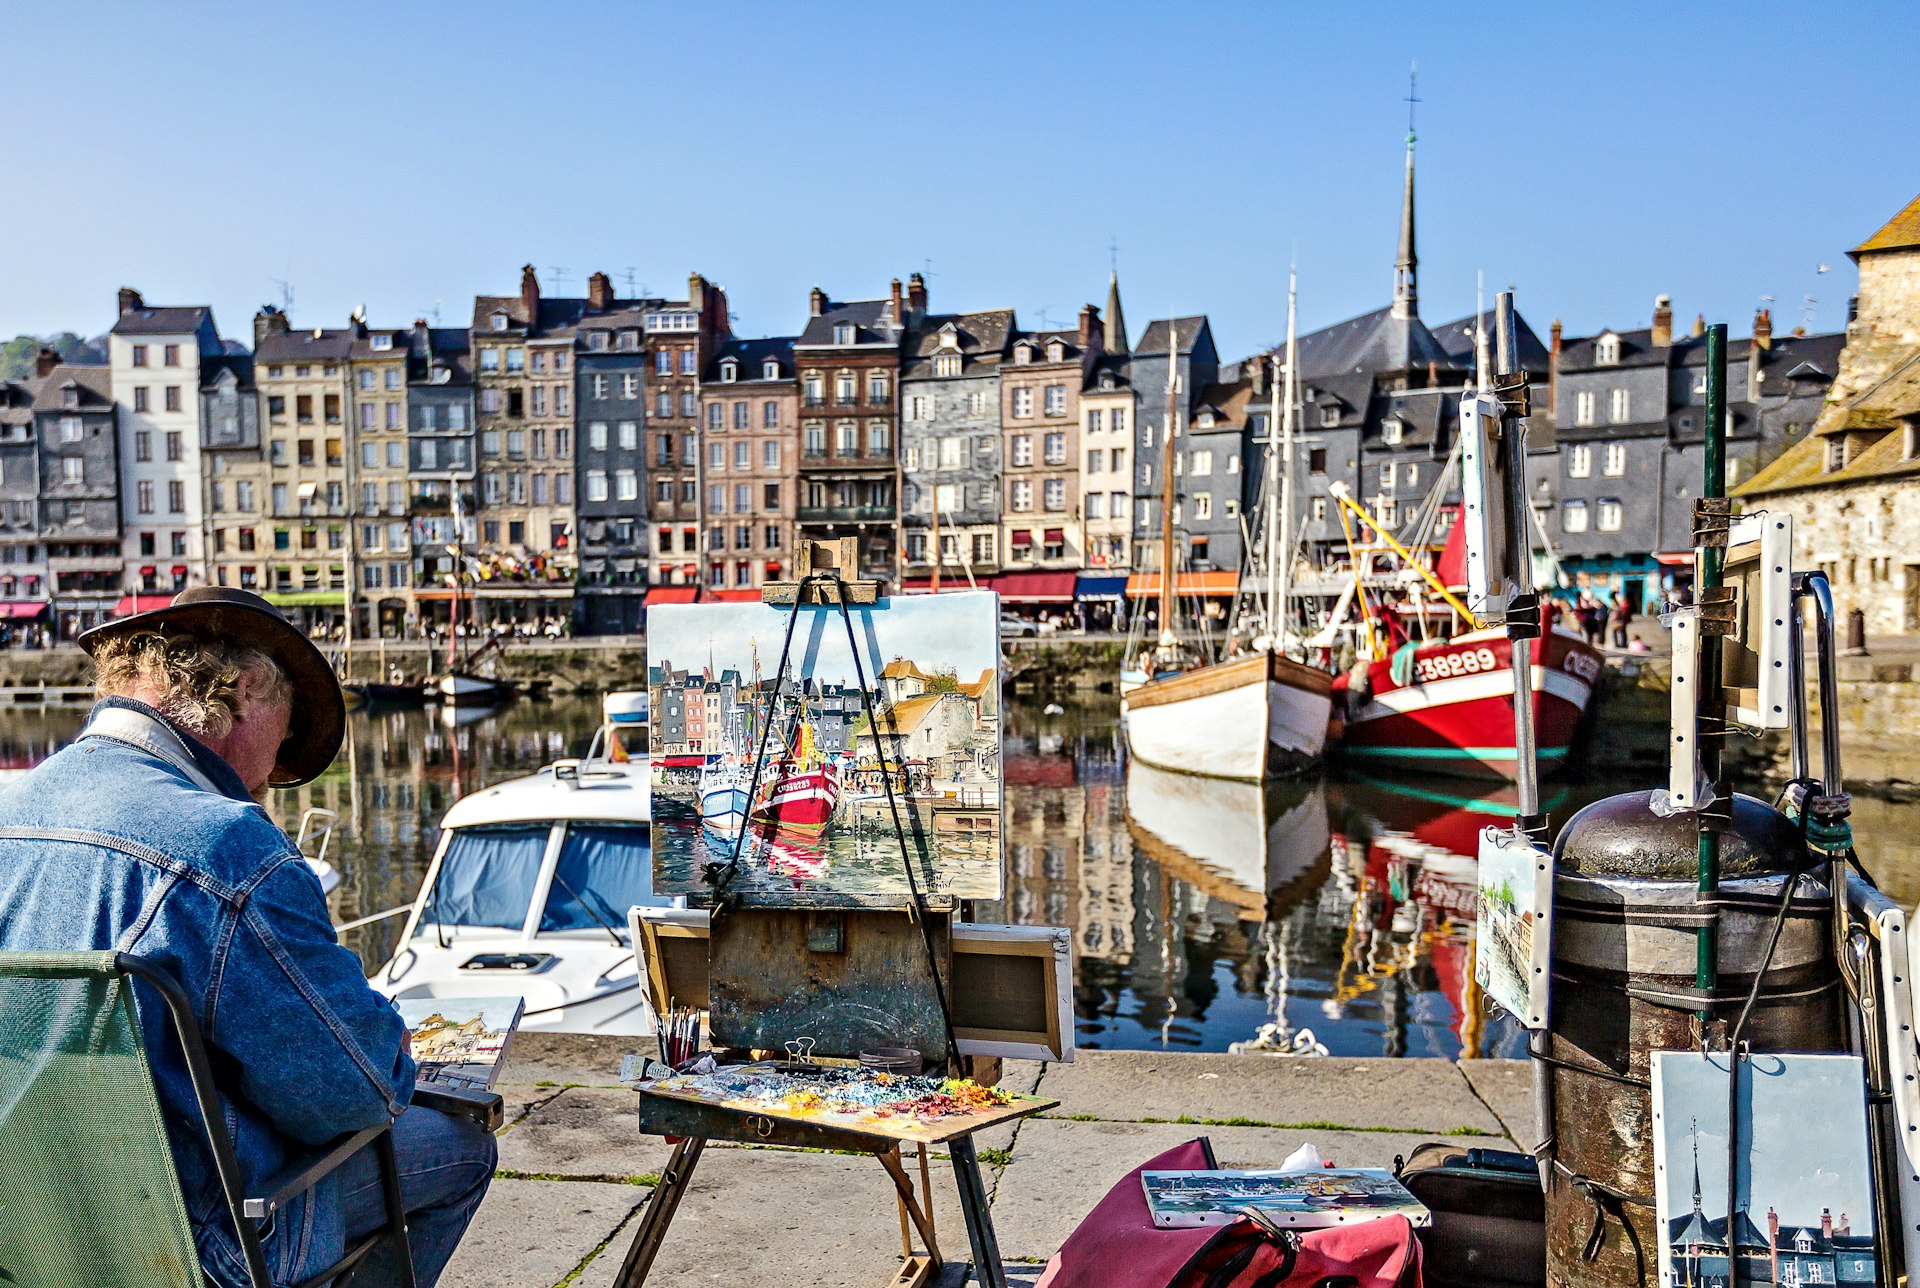 An artist paints at an easel in the historic, sailboat-filled harbor of Honfleur, Normandy, France